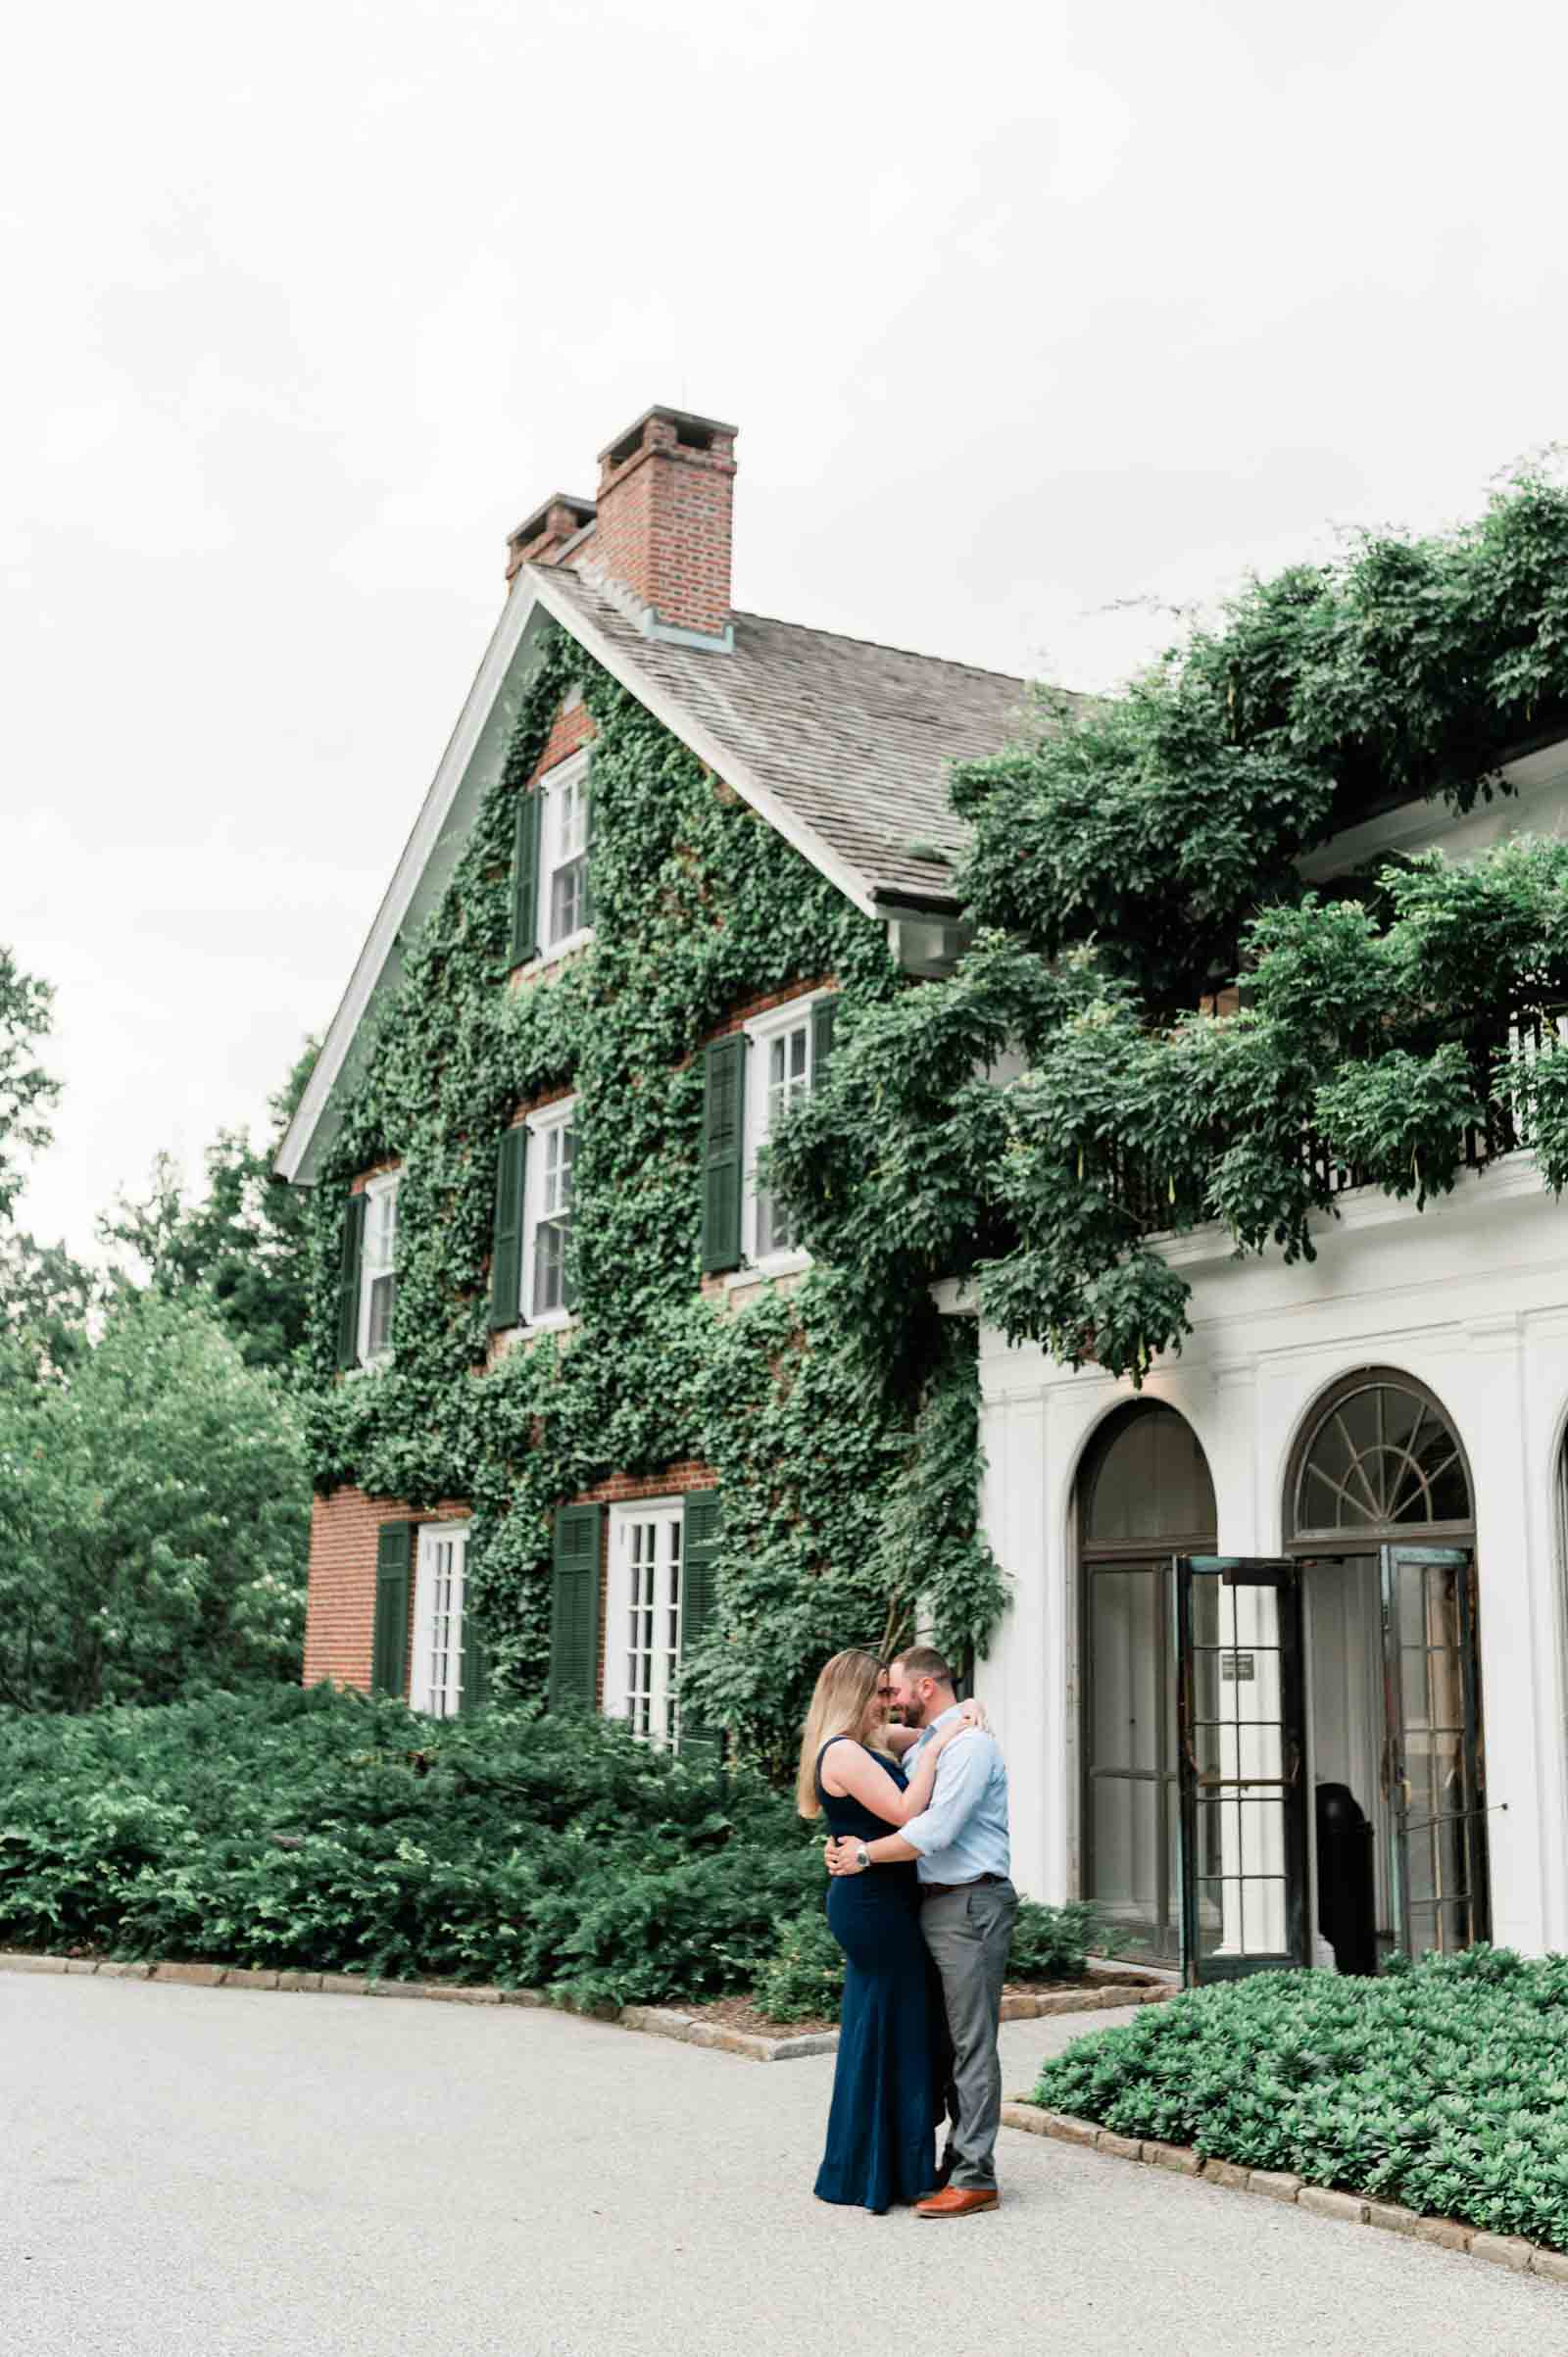 Charming couple surrounded by nature's beauty during their engagement photo session in Philadelphia.